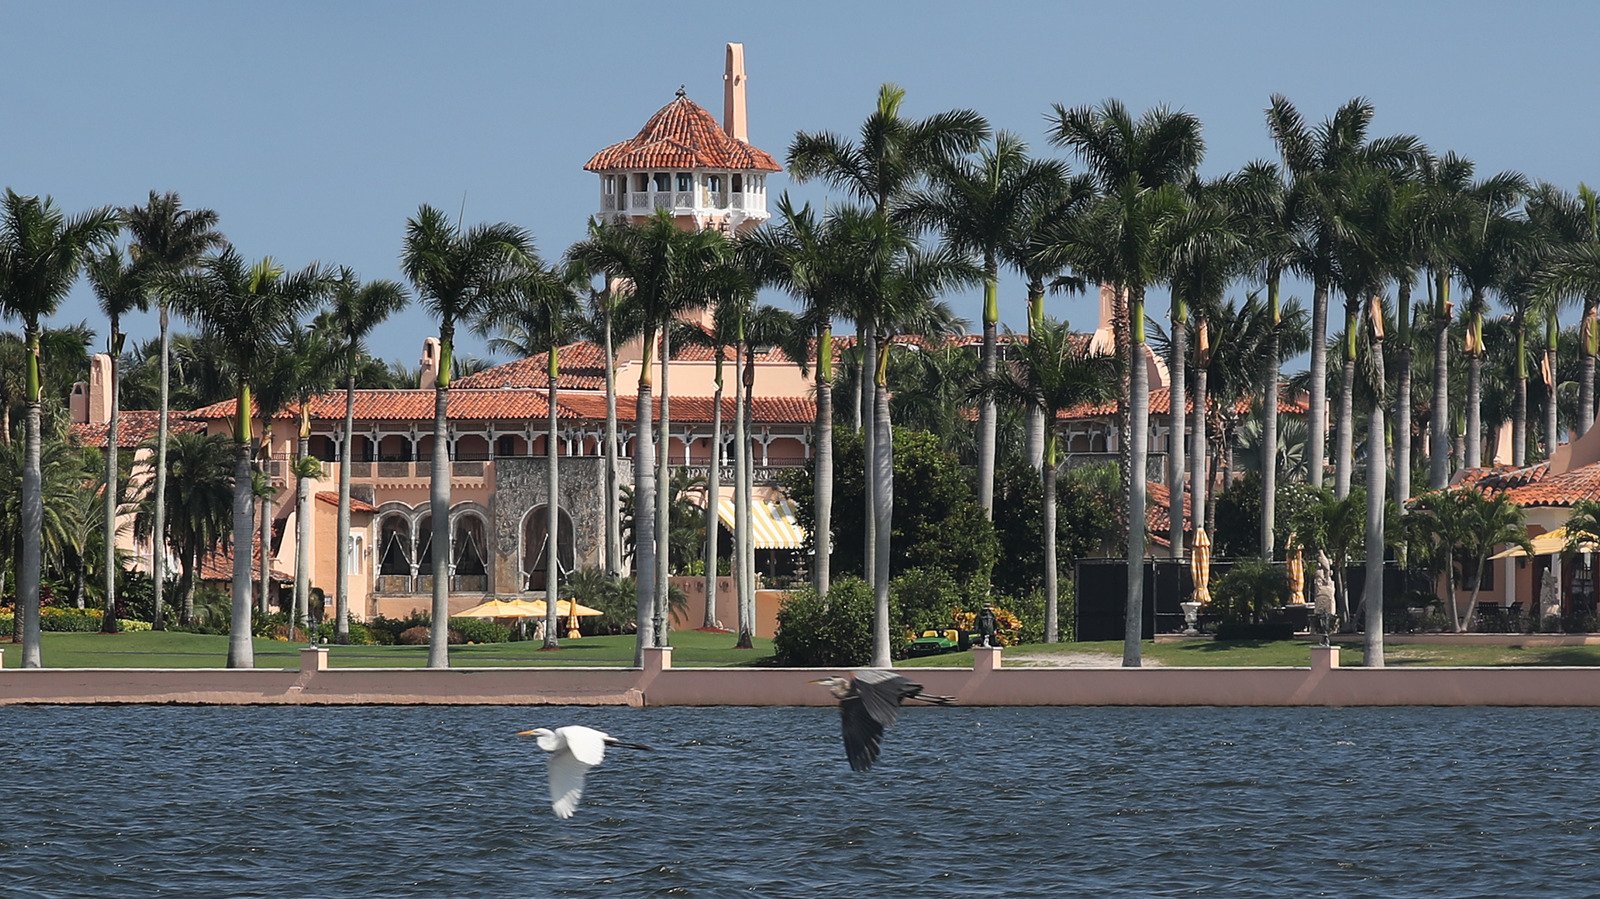 The Truth About Donald And Melania Trump's Life At Mar-A-Lago - The List